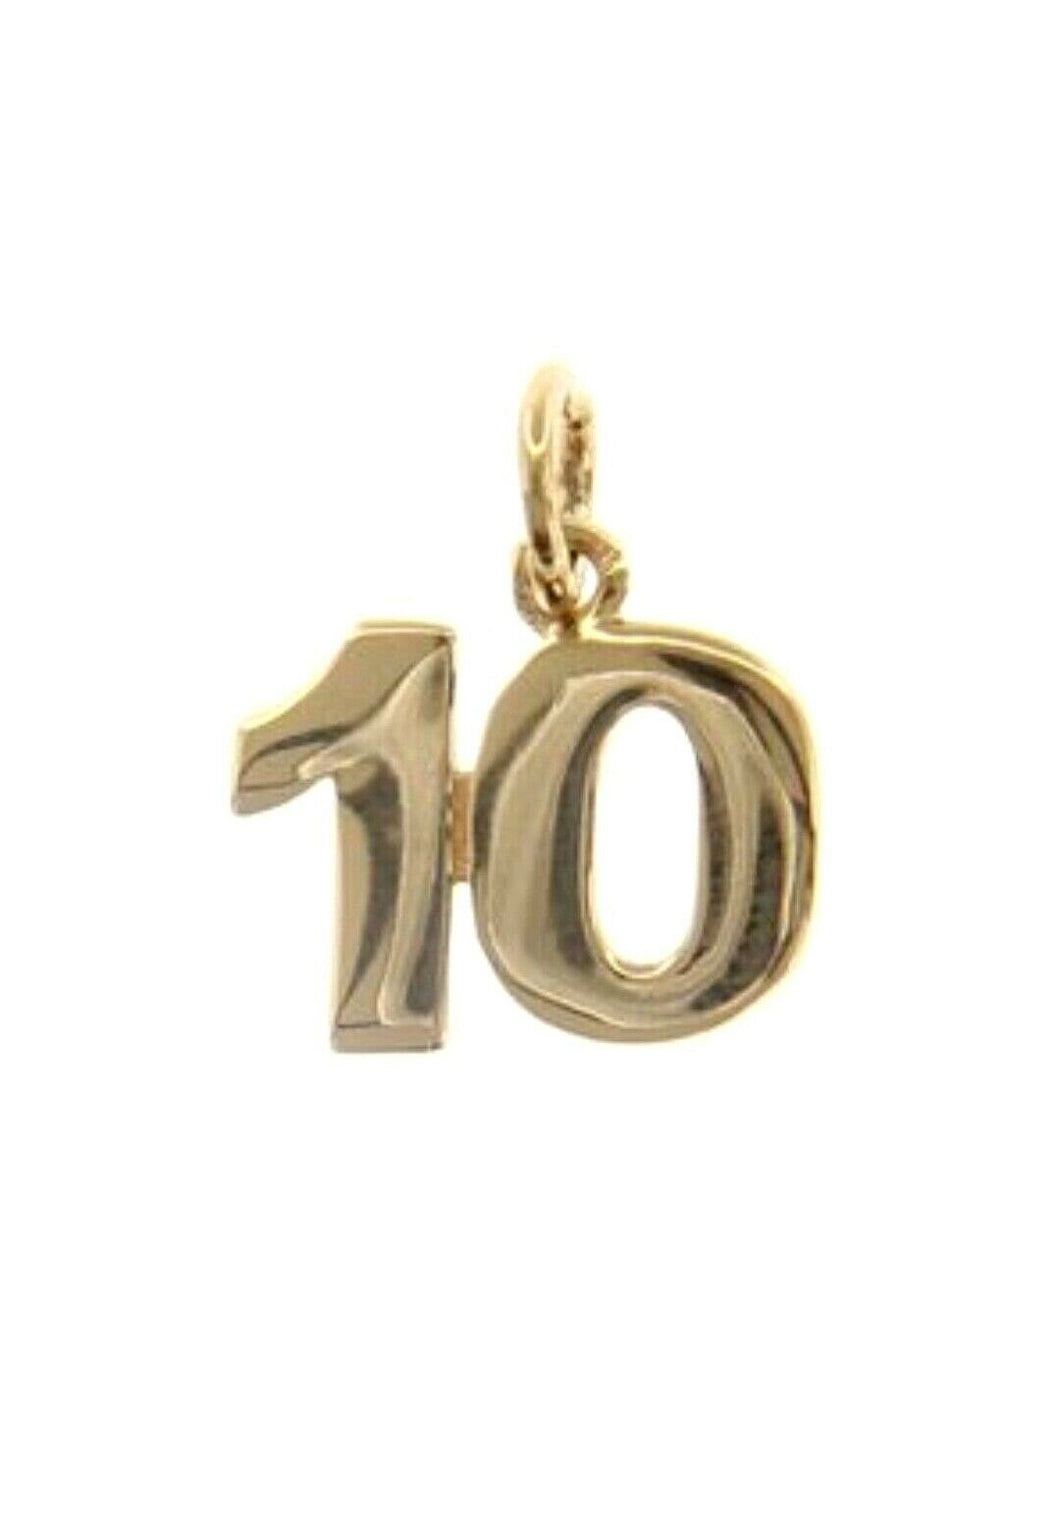 18k yellow gold number 10 ten small pendant charm, 0.4